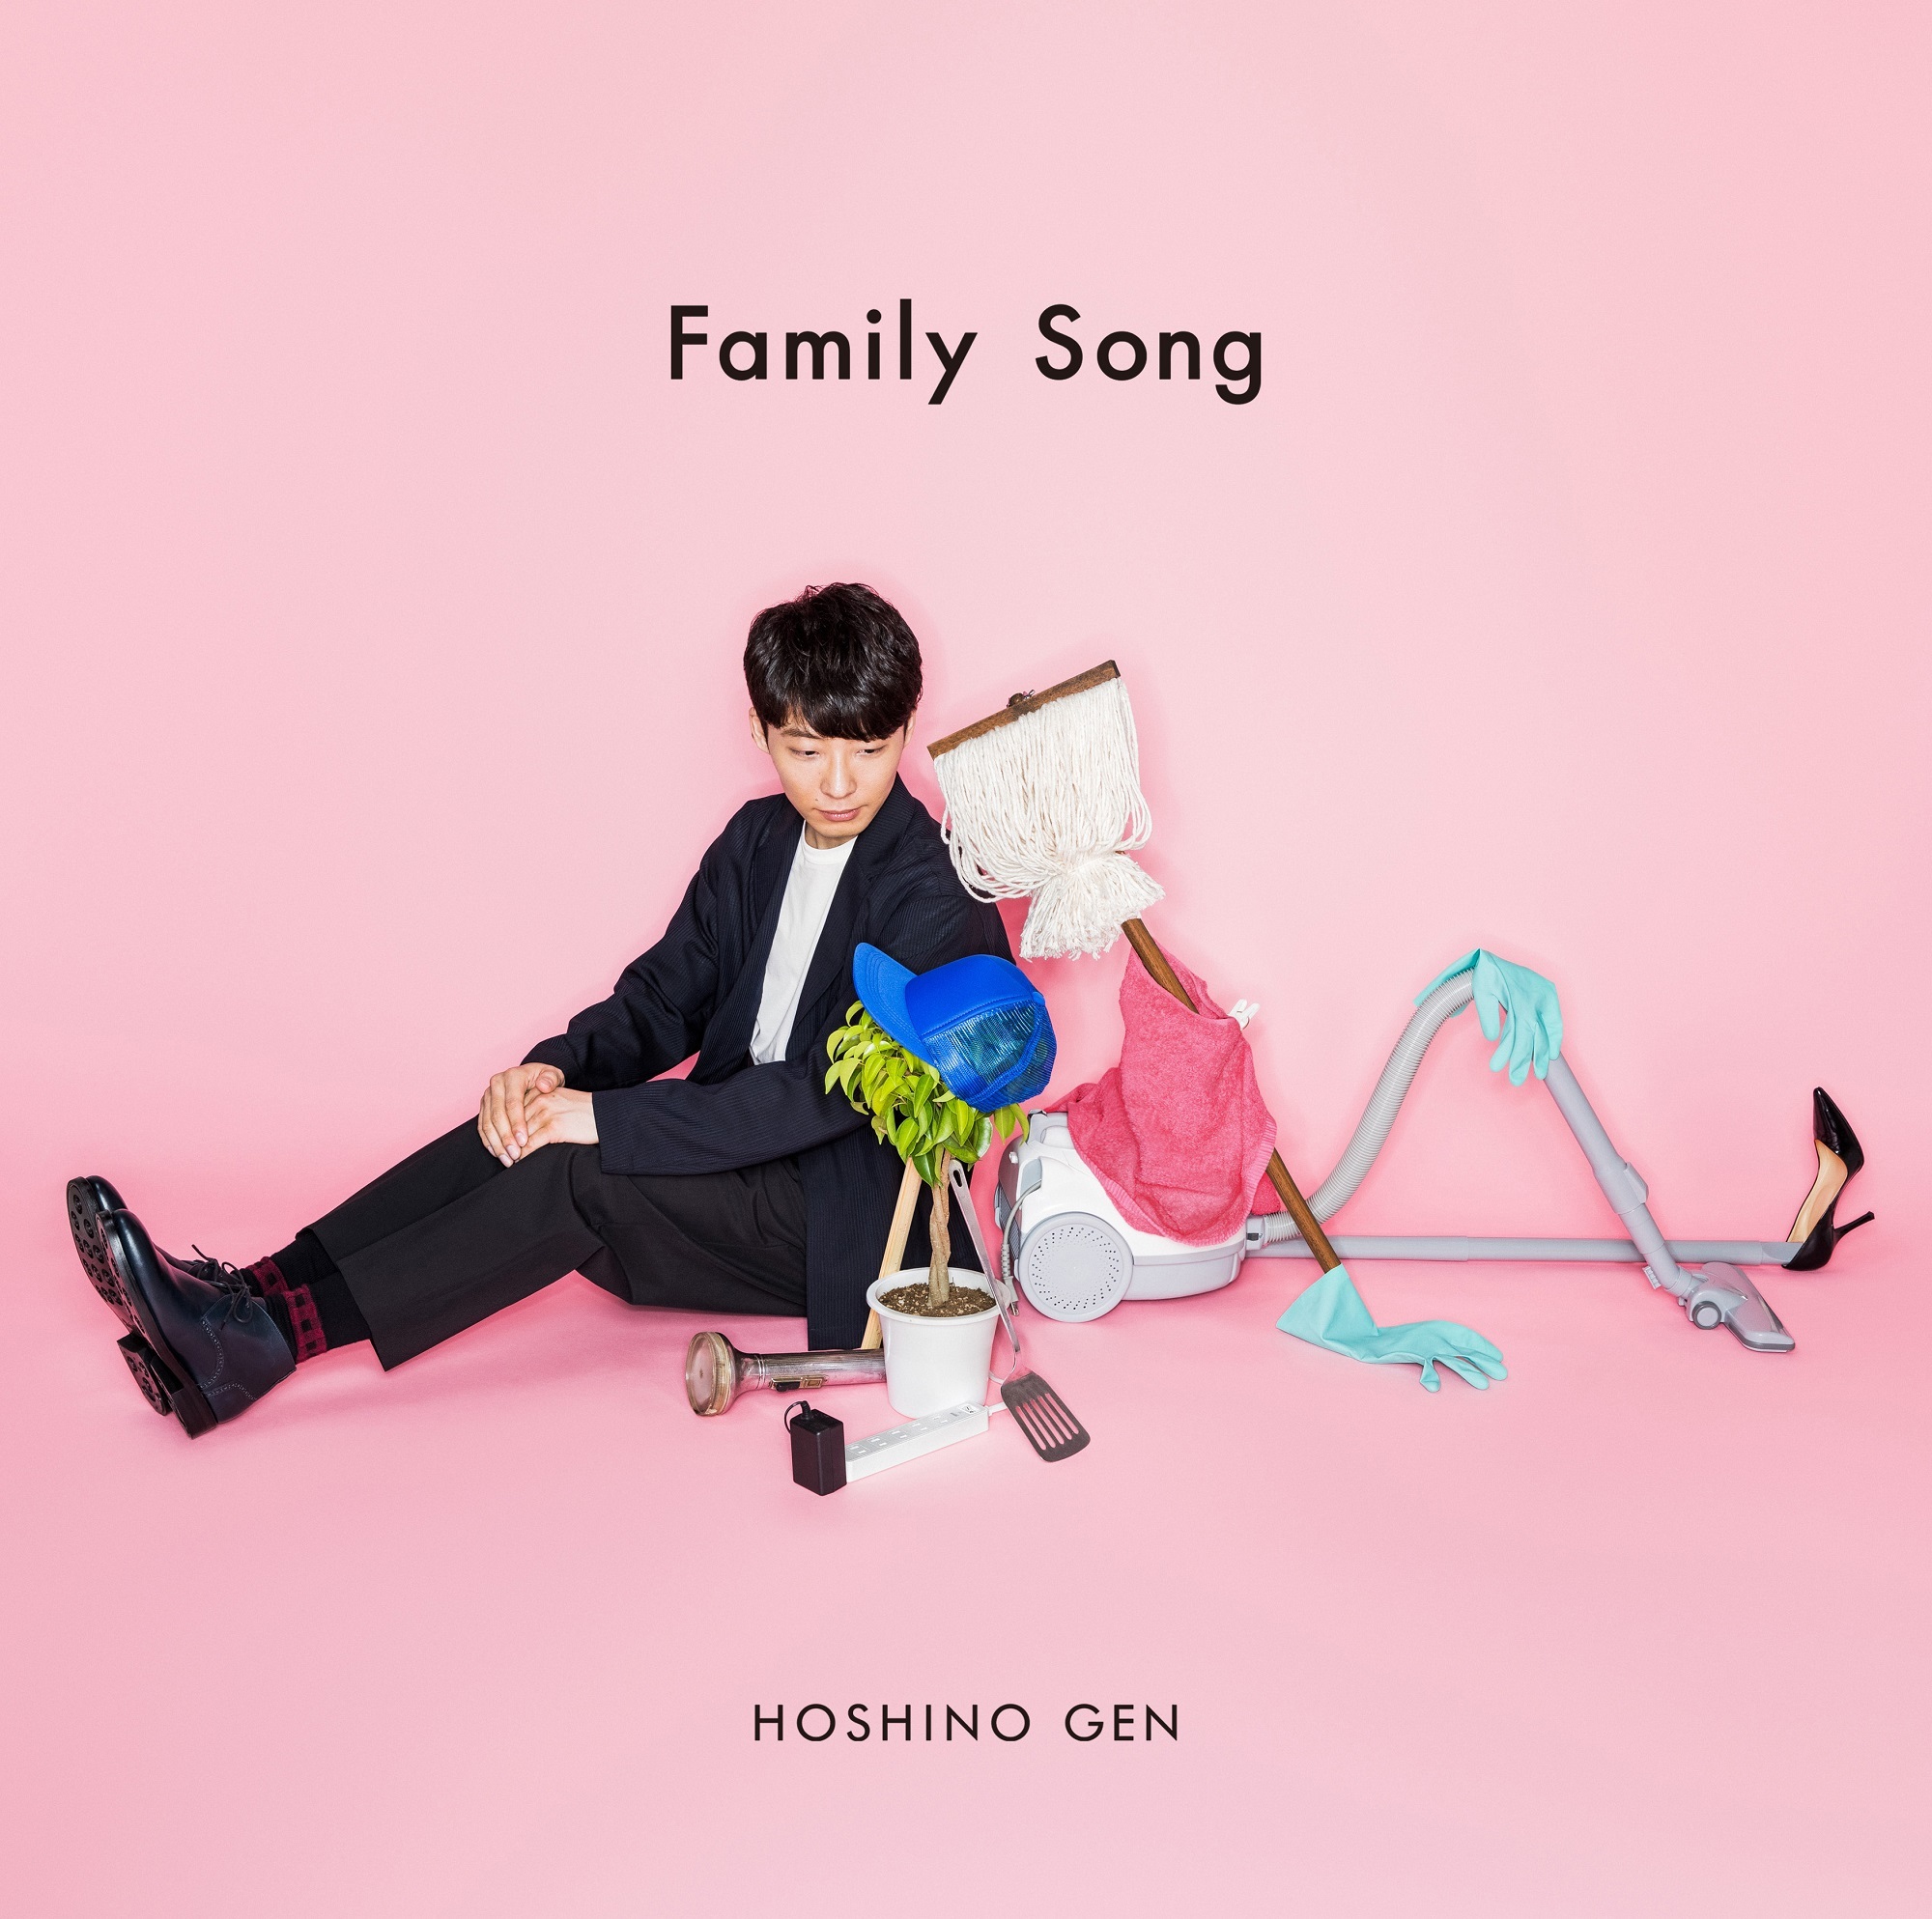 「Family Song」